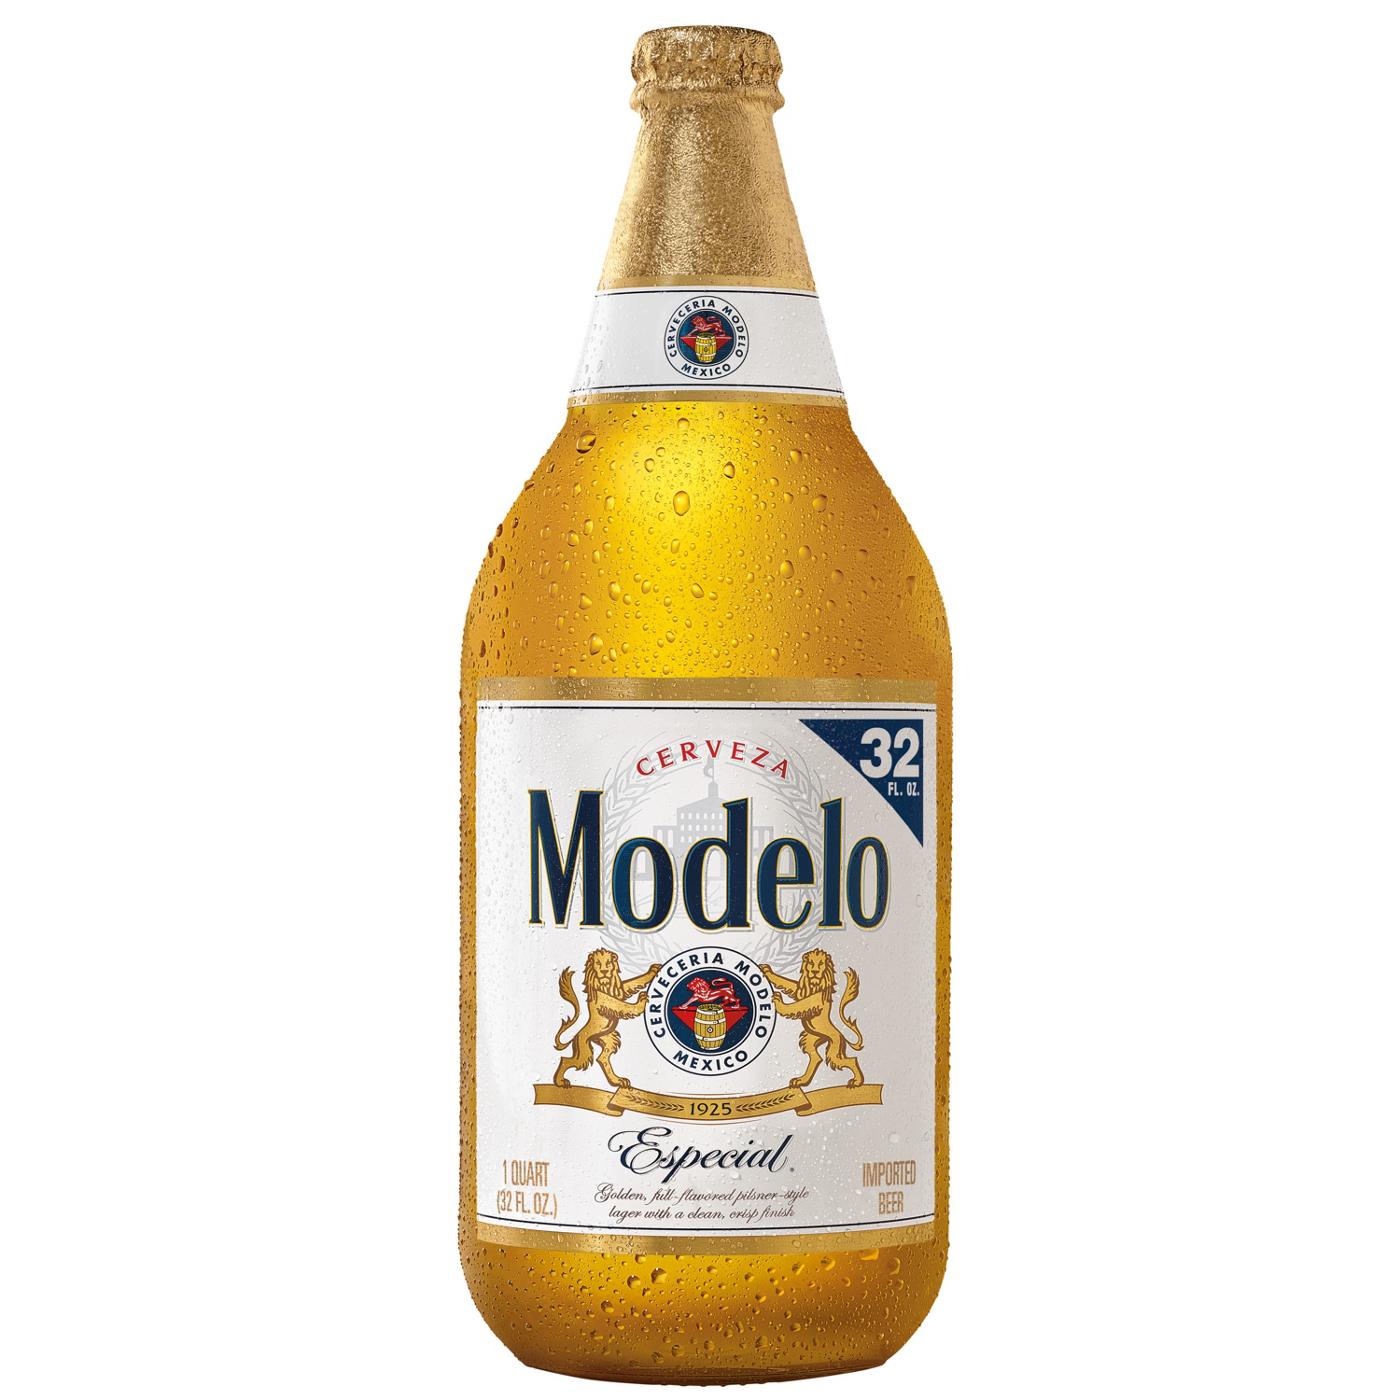 Modelo Especial Mexican Lager Import Beer 32 oz Bottle; image 1 of 10